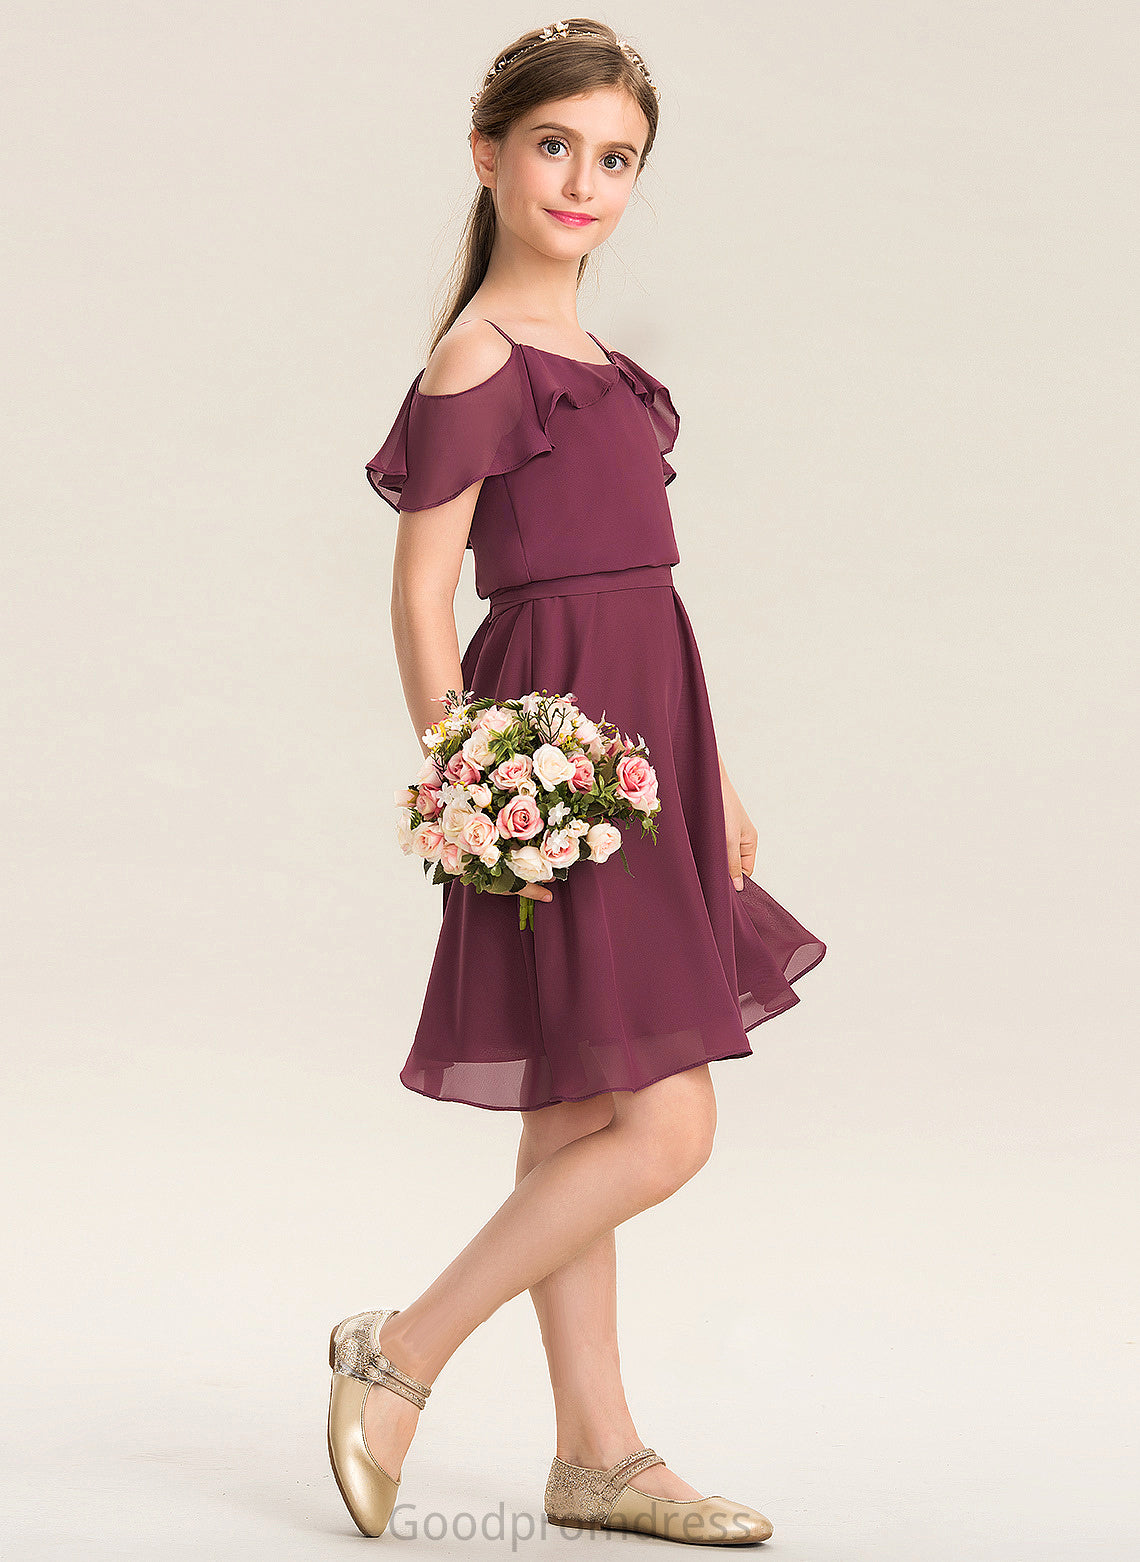 Off-the-Shoulder With Junior Bridesmaid Dresses Knee-Length Cascading Chiffon Bow(s) A-Line Juliet Ruffles